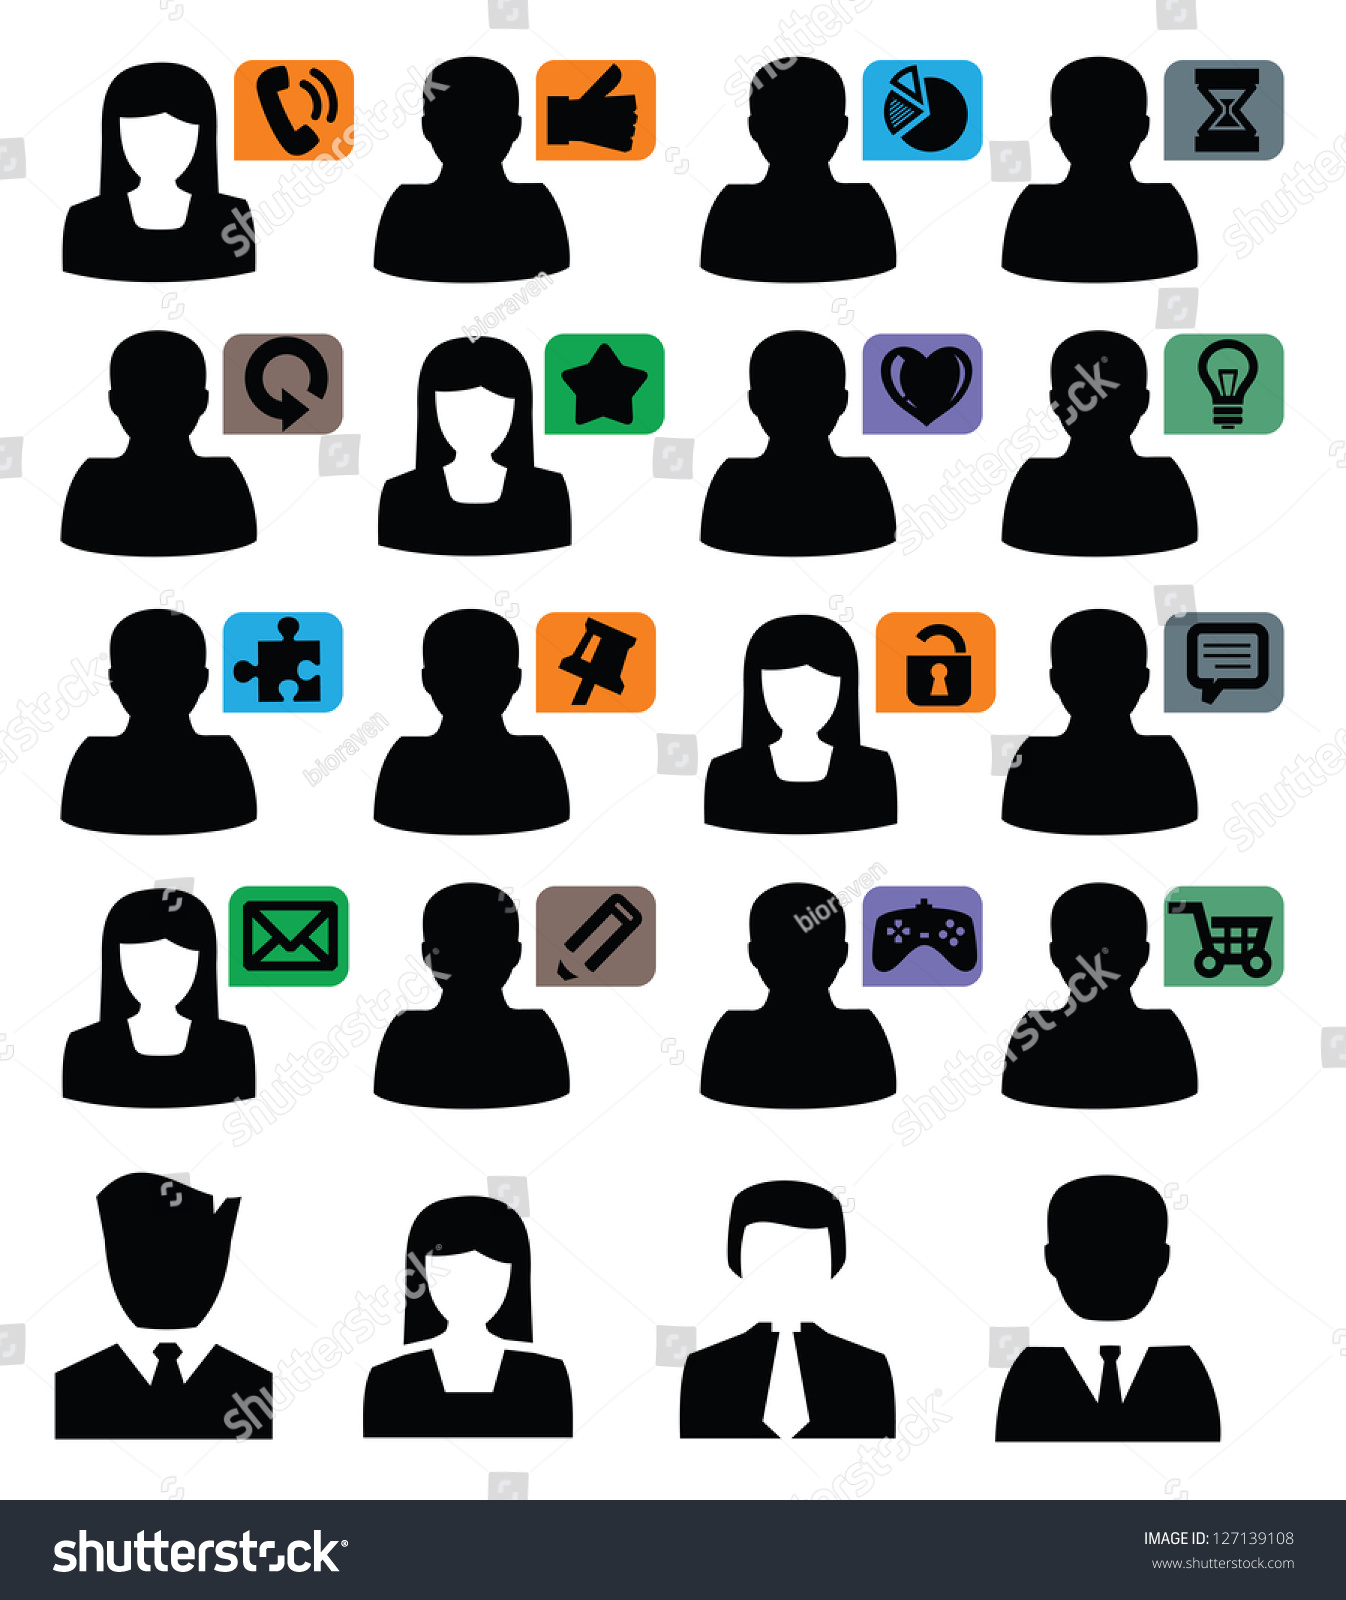 Vector Black People Icons Set On White - 127139108 : Shutterstock